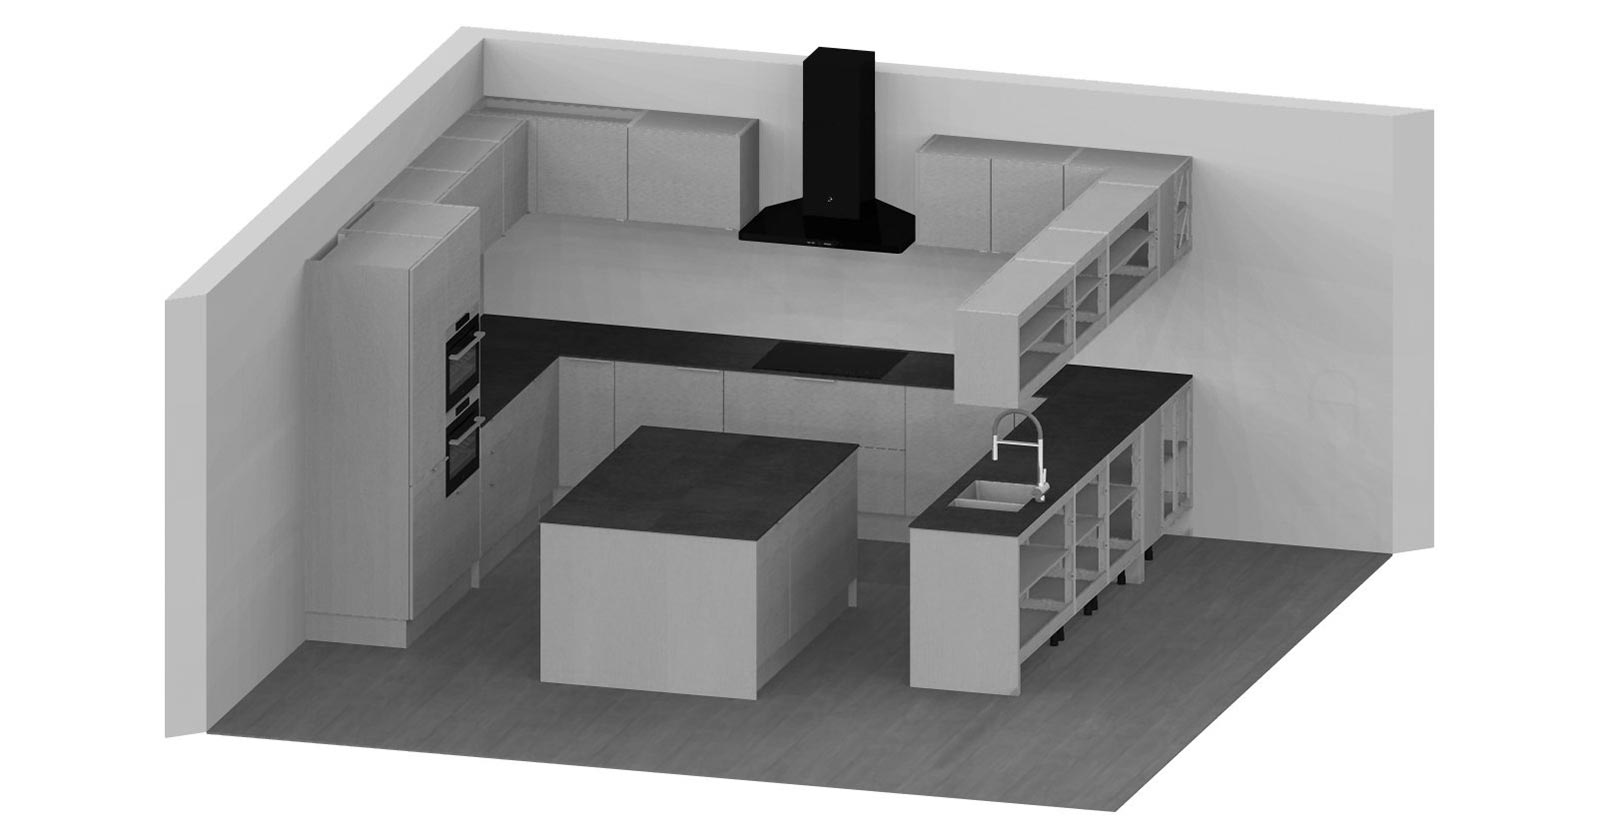 Default large Miinus kitchen with island - black and white render